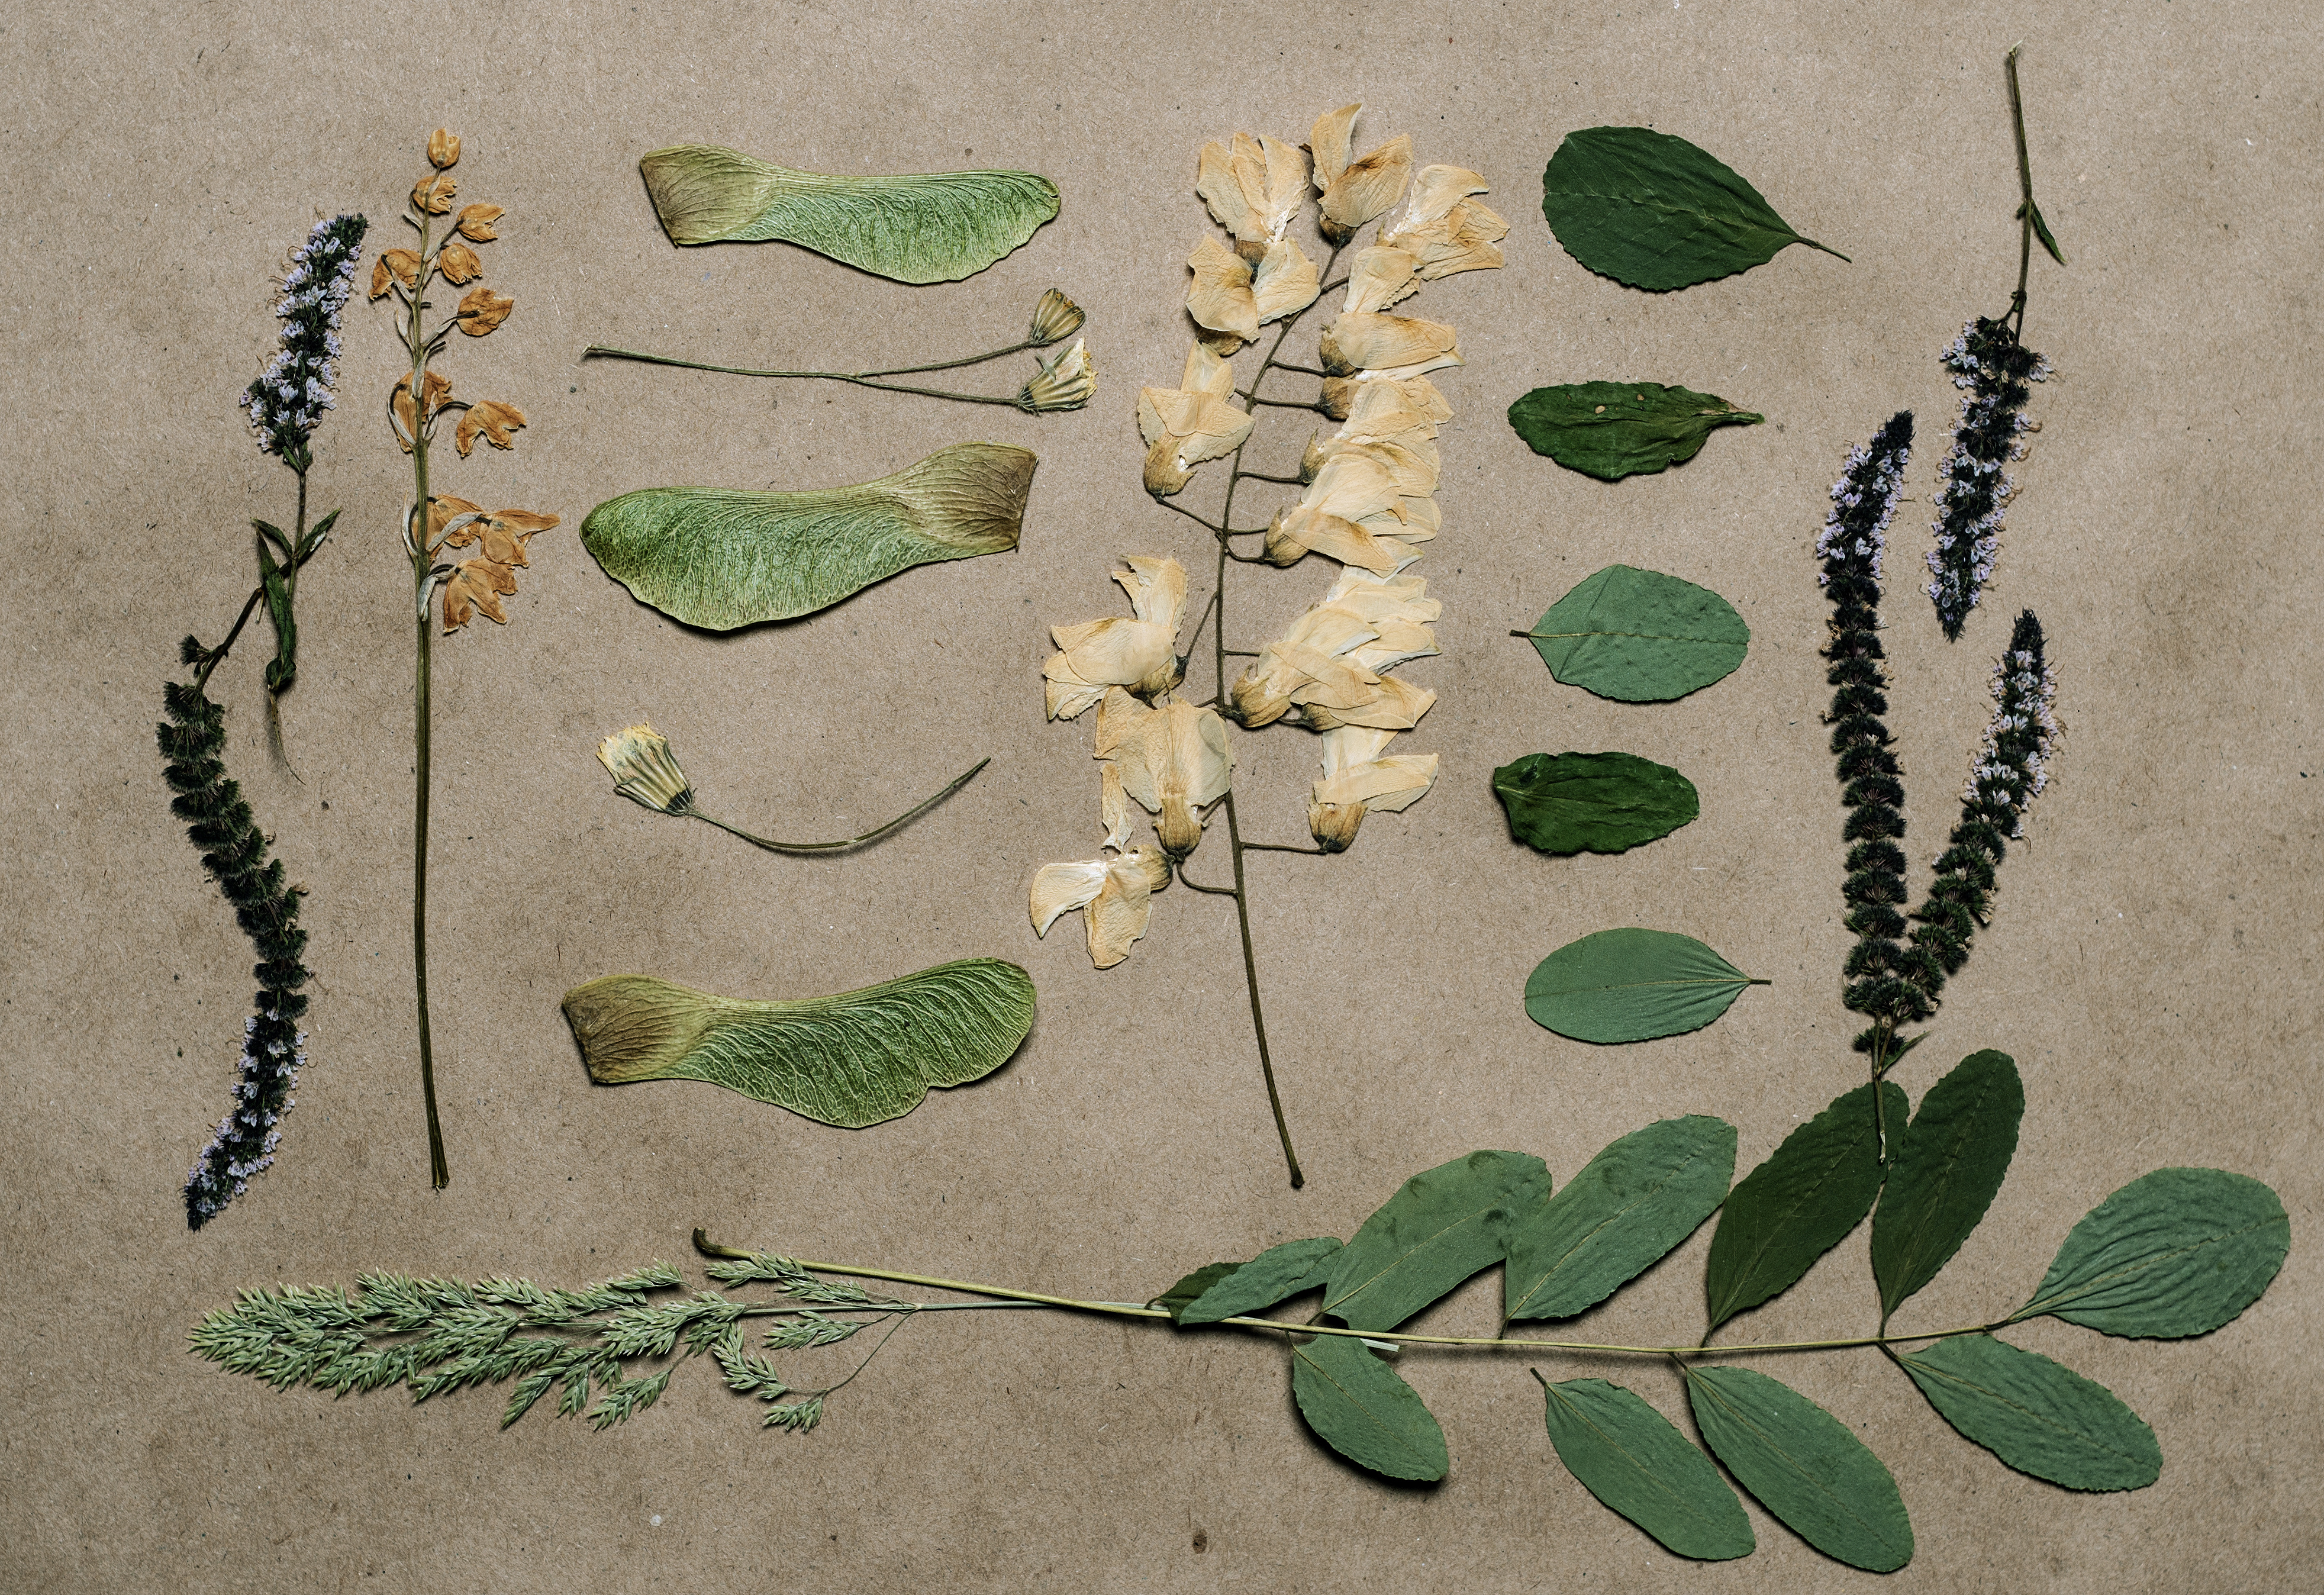 Leaves, dried flowers, and seeds are displayed on a beige paper background. 